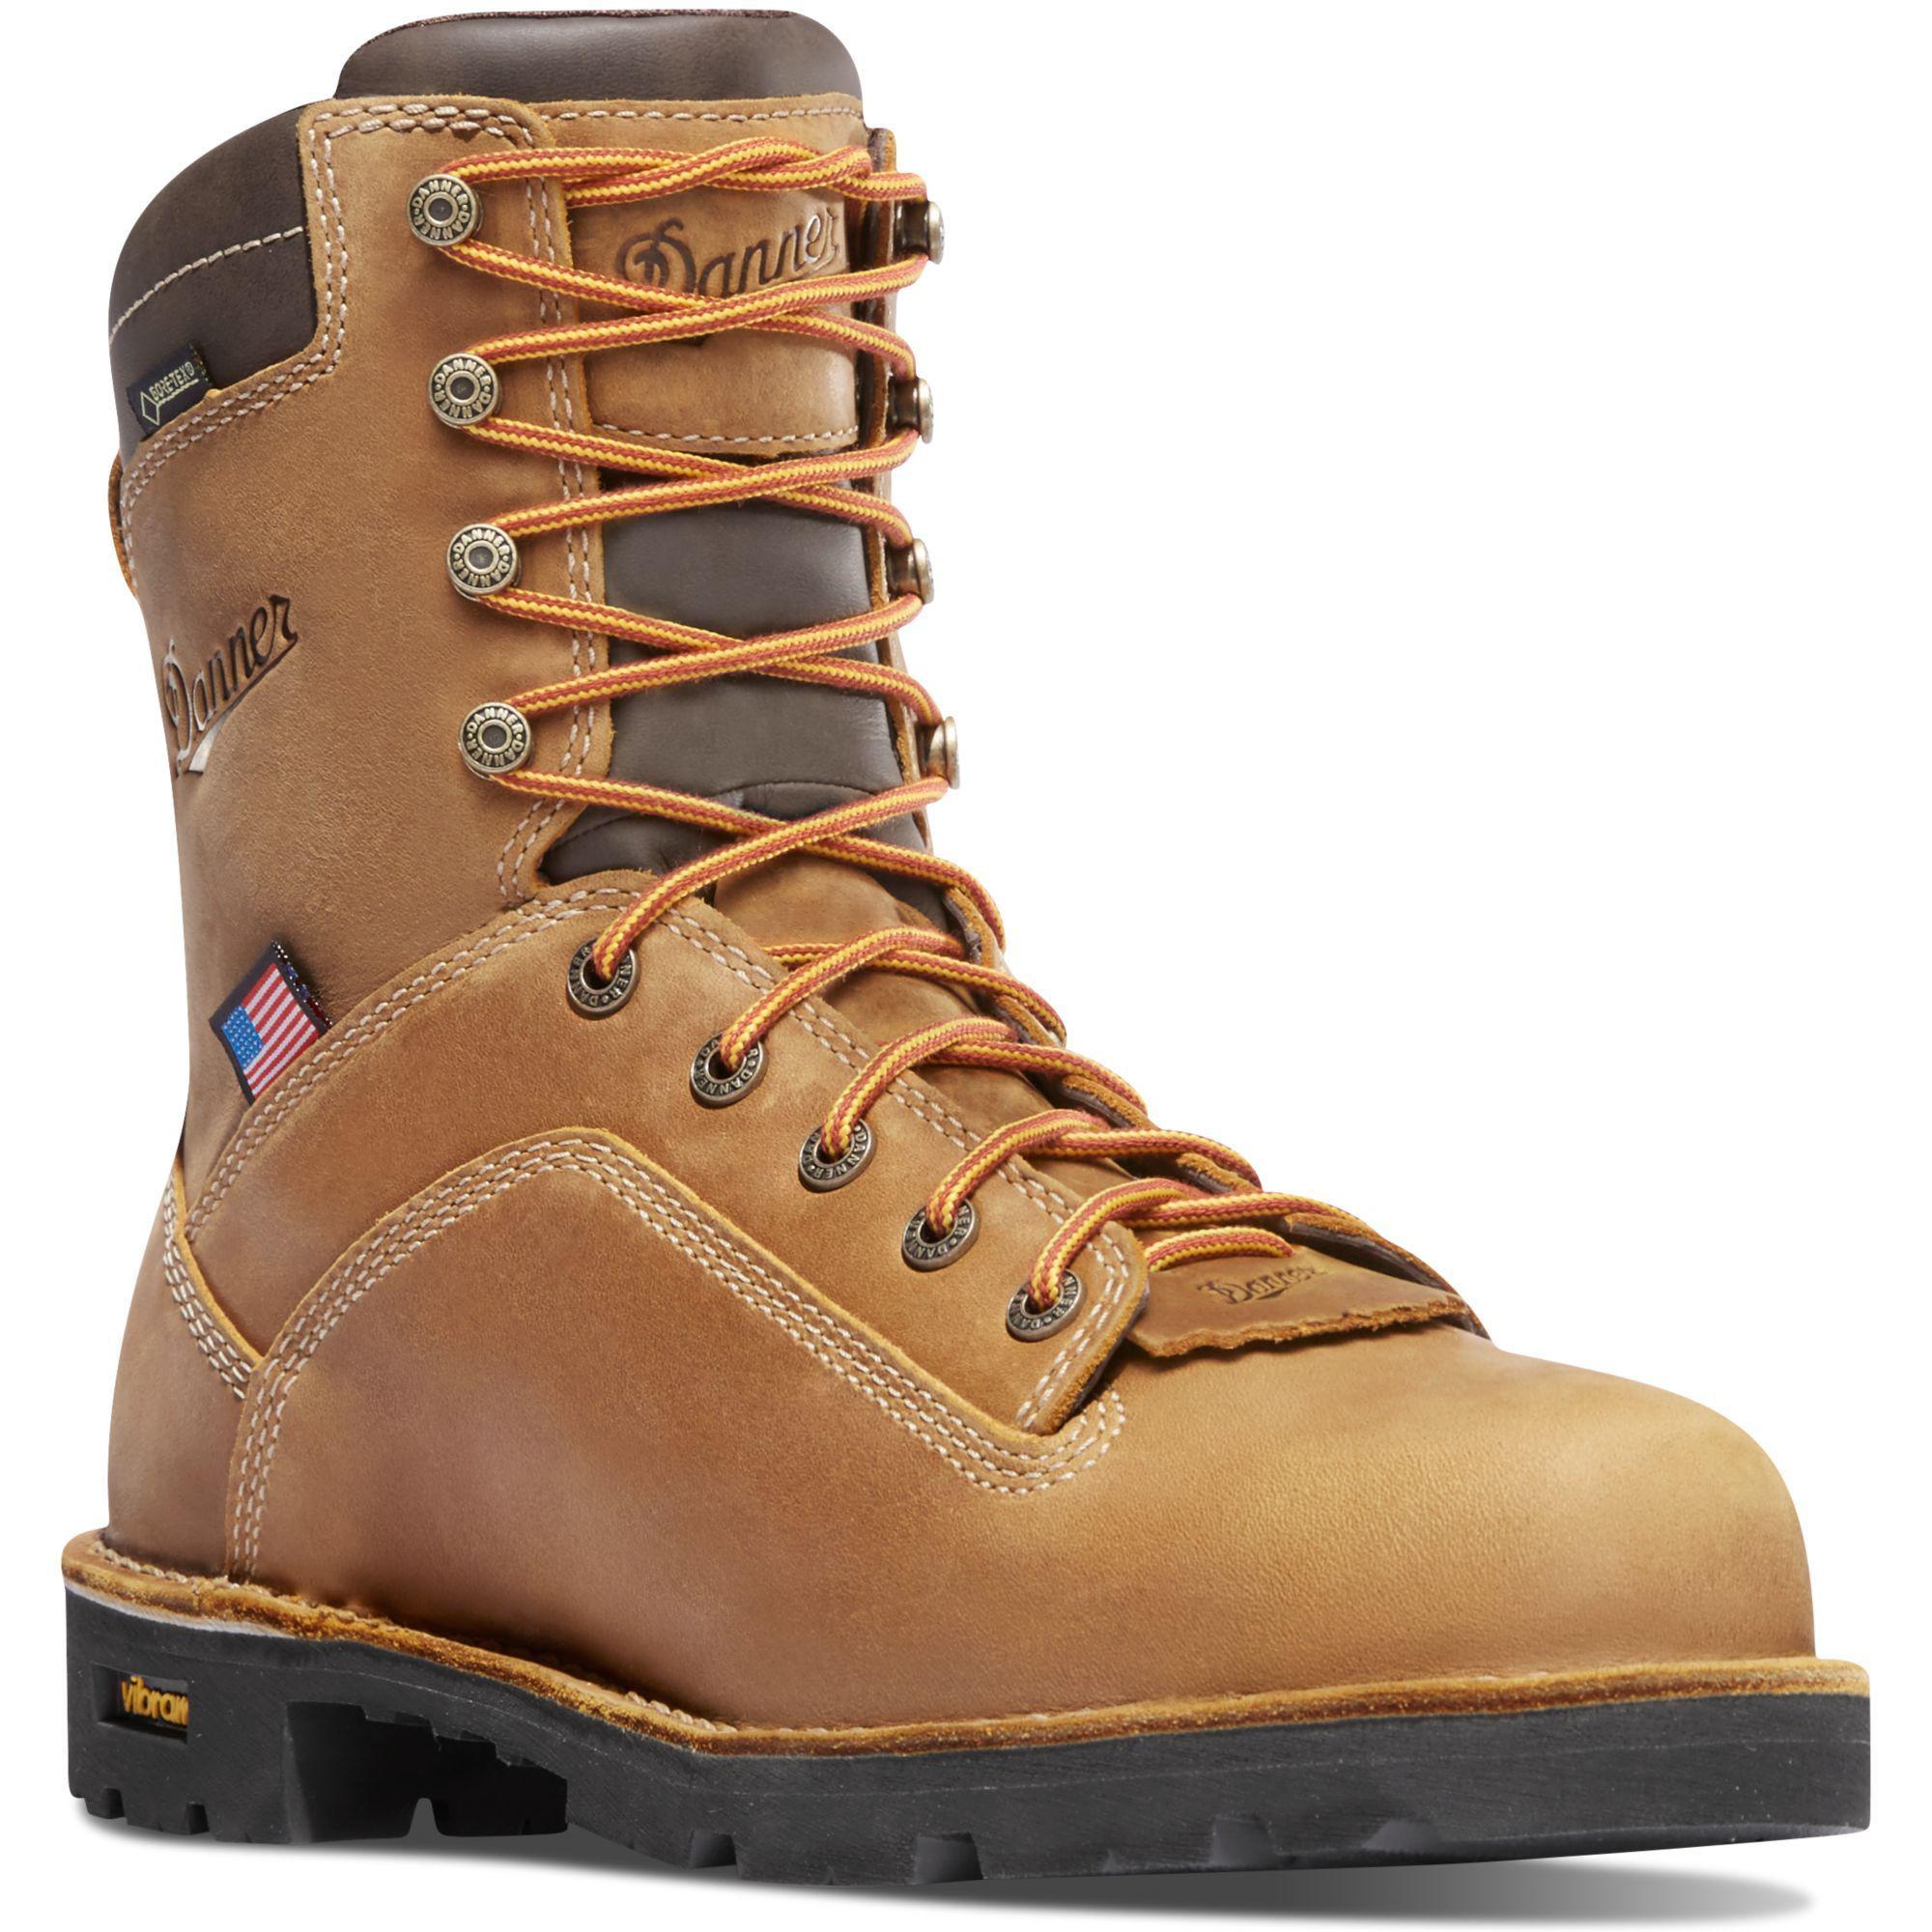 Danner Men's Quarry USA Made 8" Insulated WP Work Boot - Brown - 17319 7 / Medium / Brown - Overlook Boots